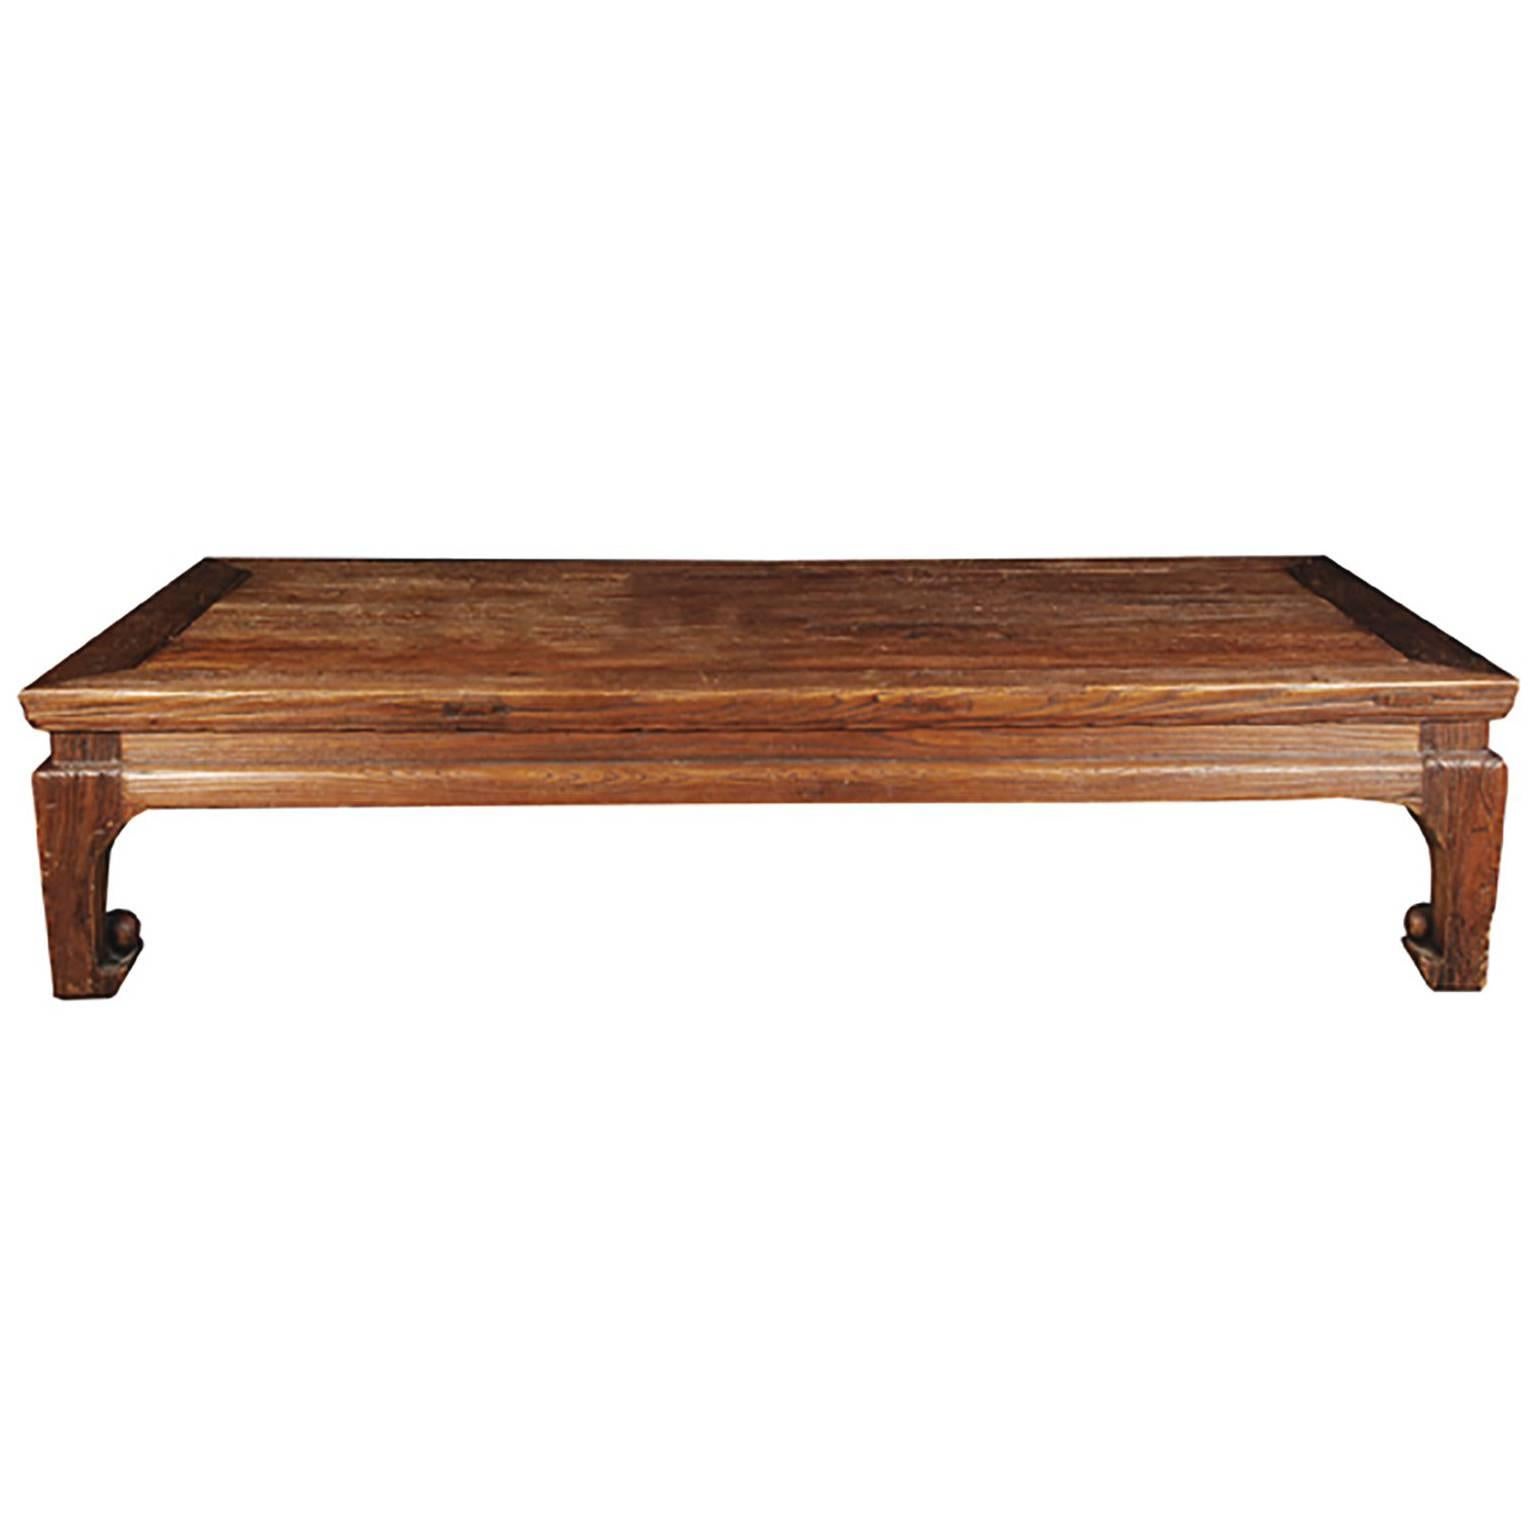 Chinese Hoofed Full Moon Low Table